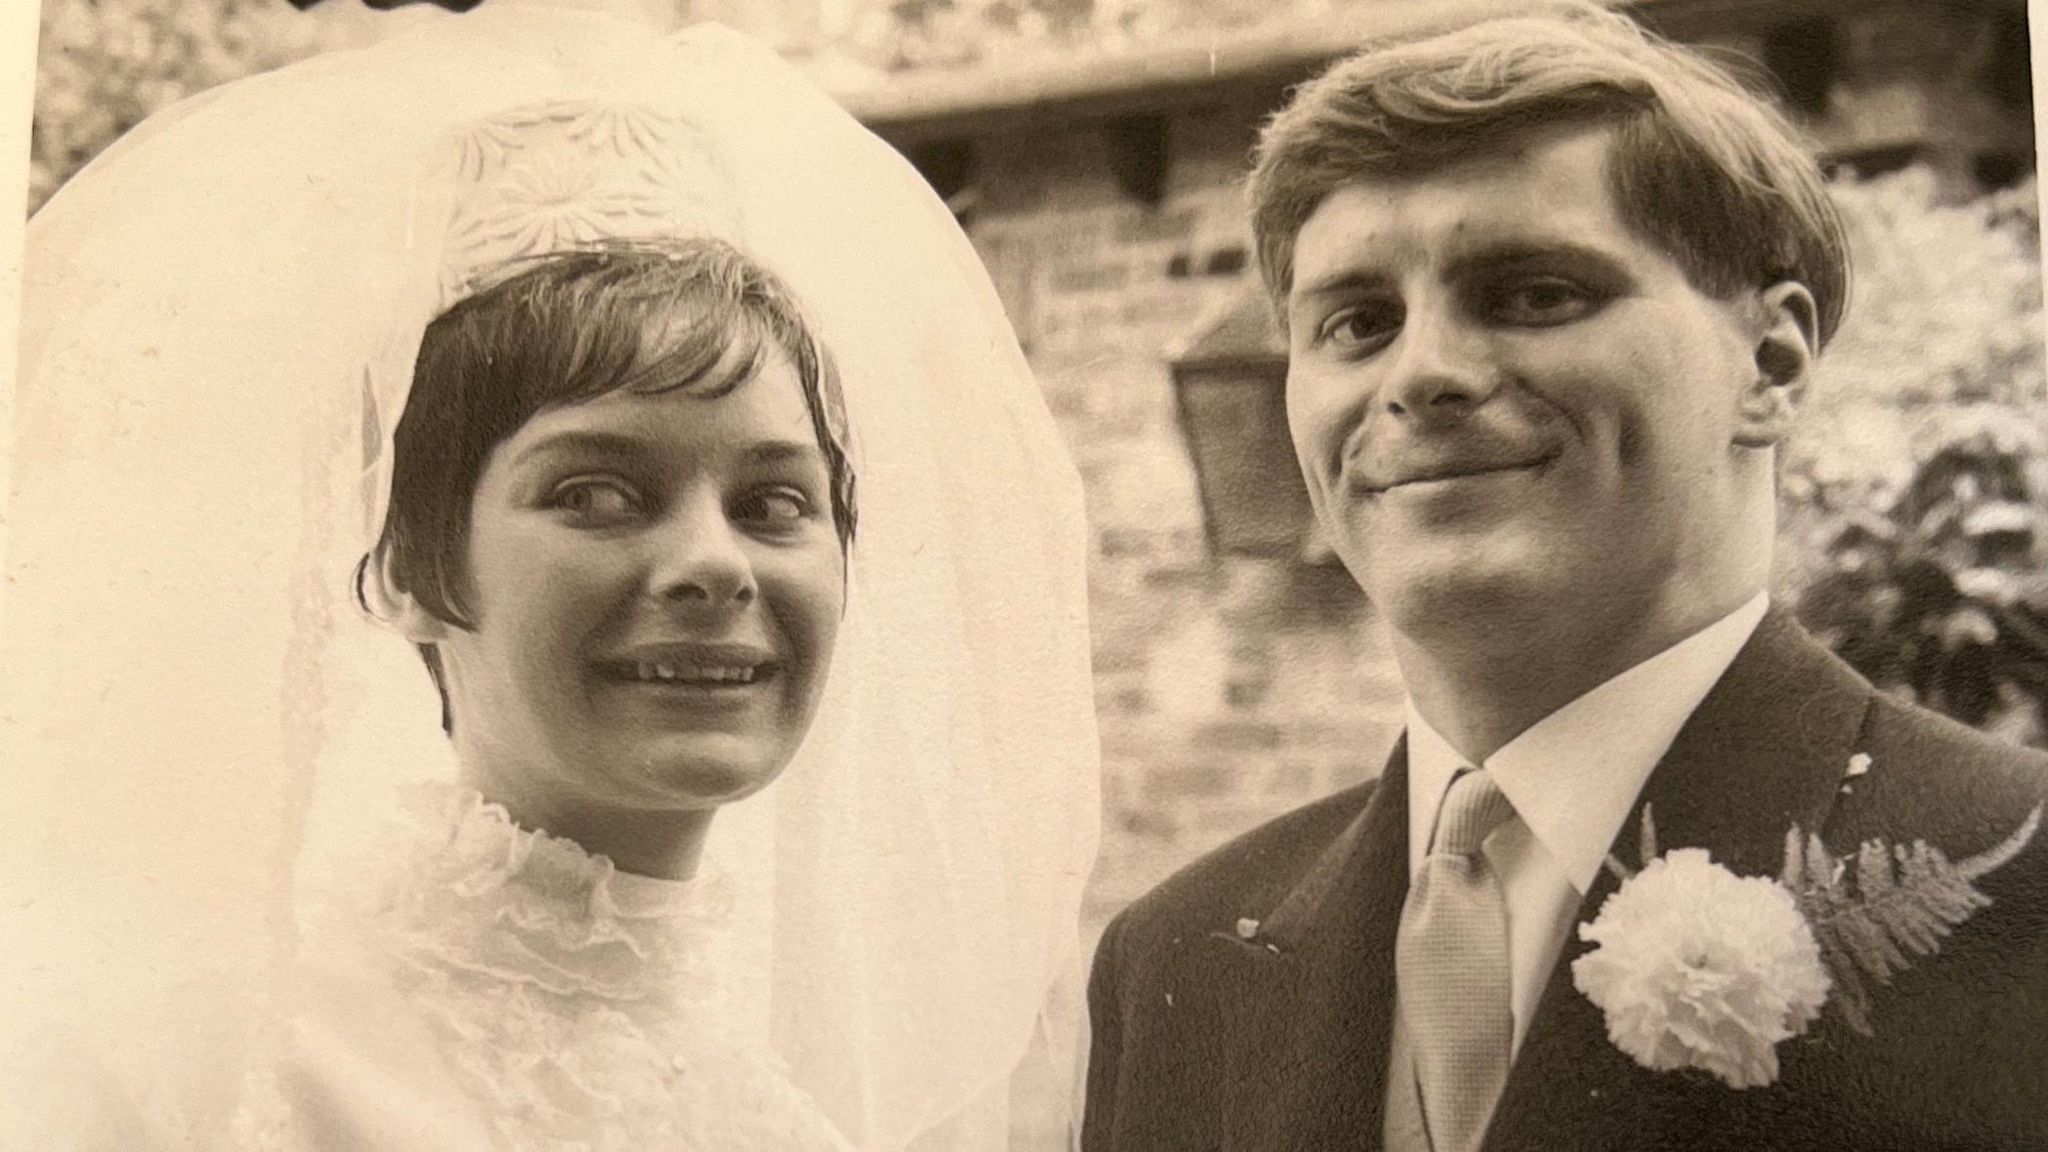 Joshua's grandparents Peter and Mary Lovegrove on their wedding day